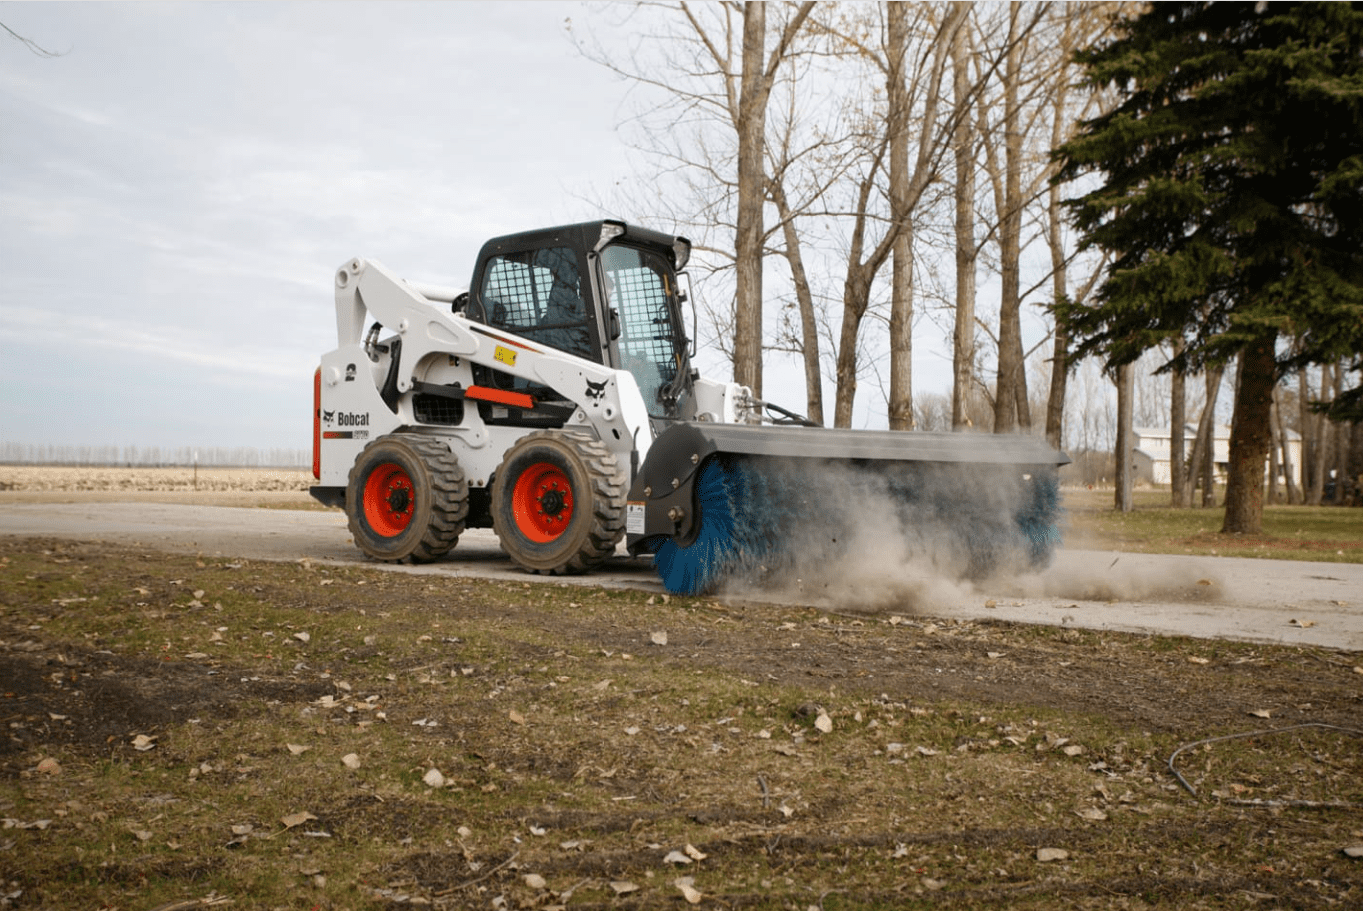 Browse Specs and more for the Bobcat S770 Skid-Steer Loader - Bobcat of North Texas